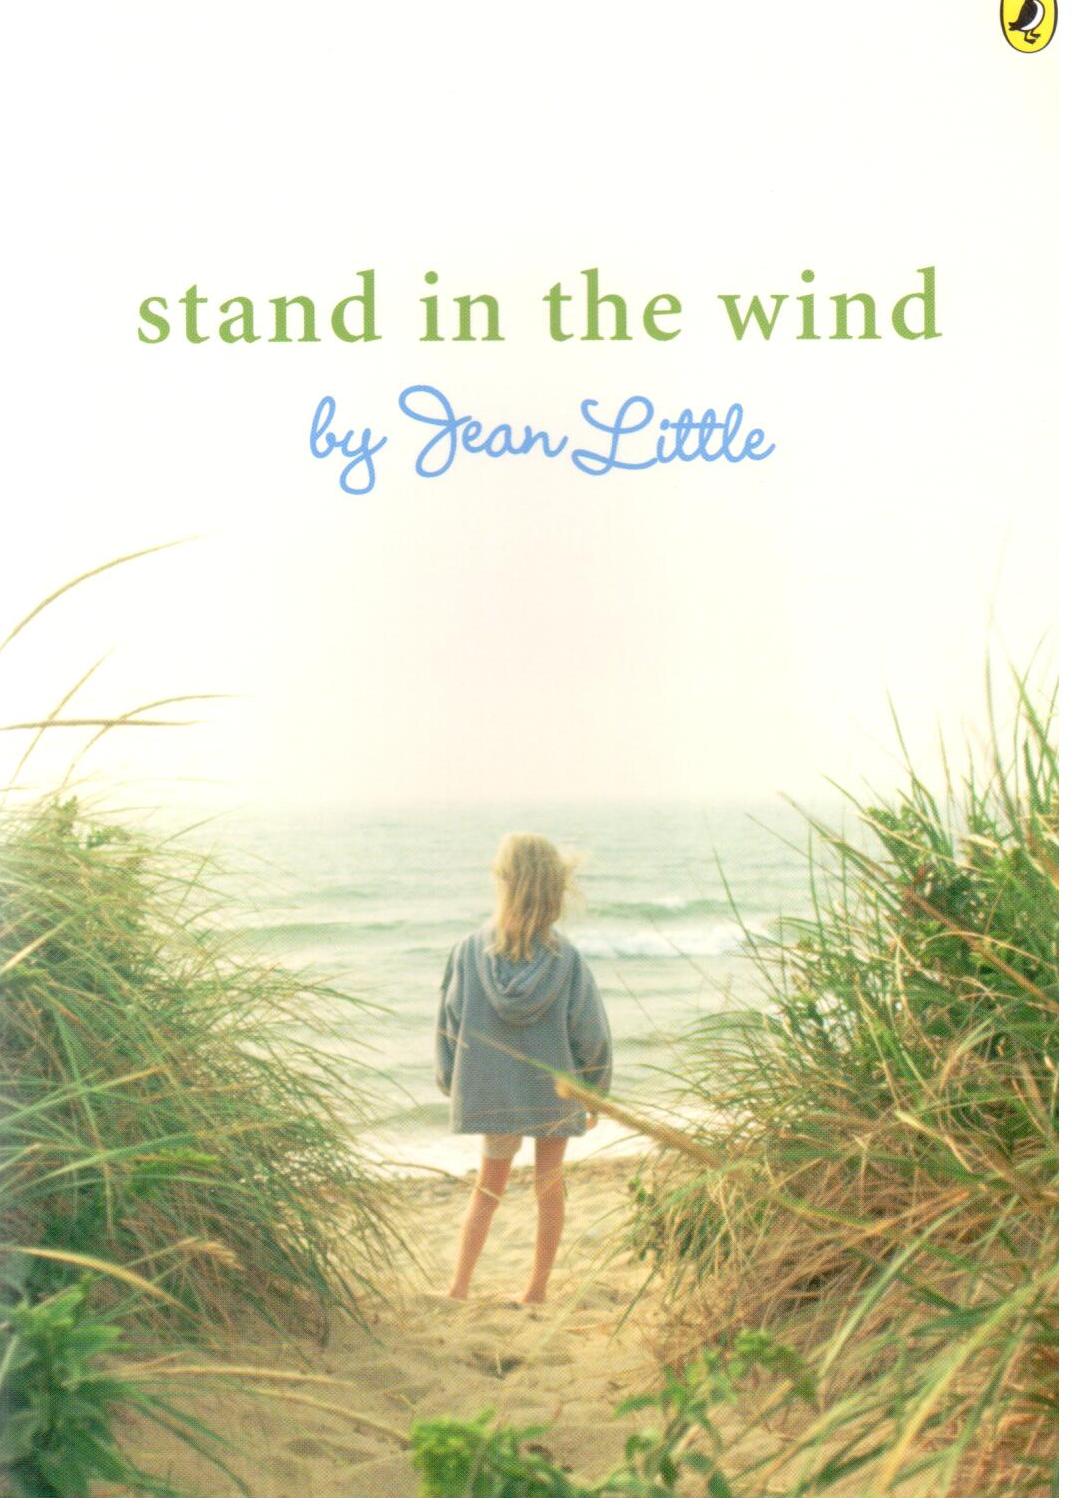 Stand in the wind